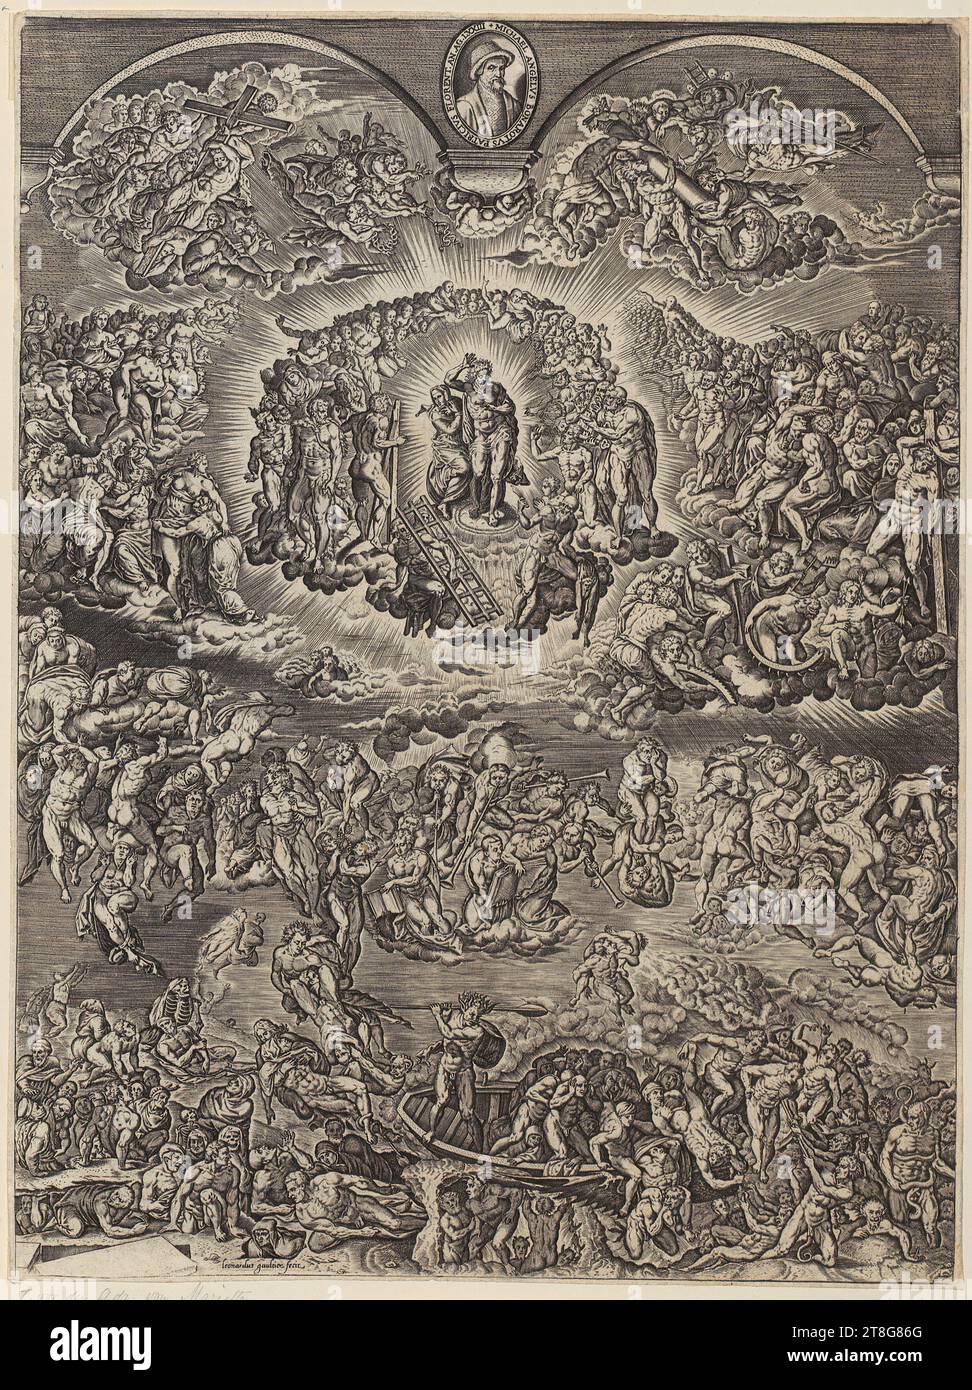 Léonard Gaultier (1561 - after 1635)Michelangelo (1475 - 1564), after, Last Judgment, print medium: 1600 - 1641, copperplate engraving, sheet size: 31.6 x 23.6 cm, inscribed at top center around medallion 'MICHAEL ANGELVS BONAROTVS PATRICIVS FLORENT. AN. AG. LXXIII', inscribed on verso lower center in graphite 'L.5A, JMT Stock Photo